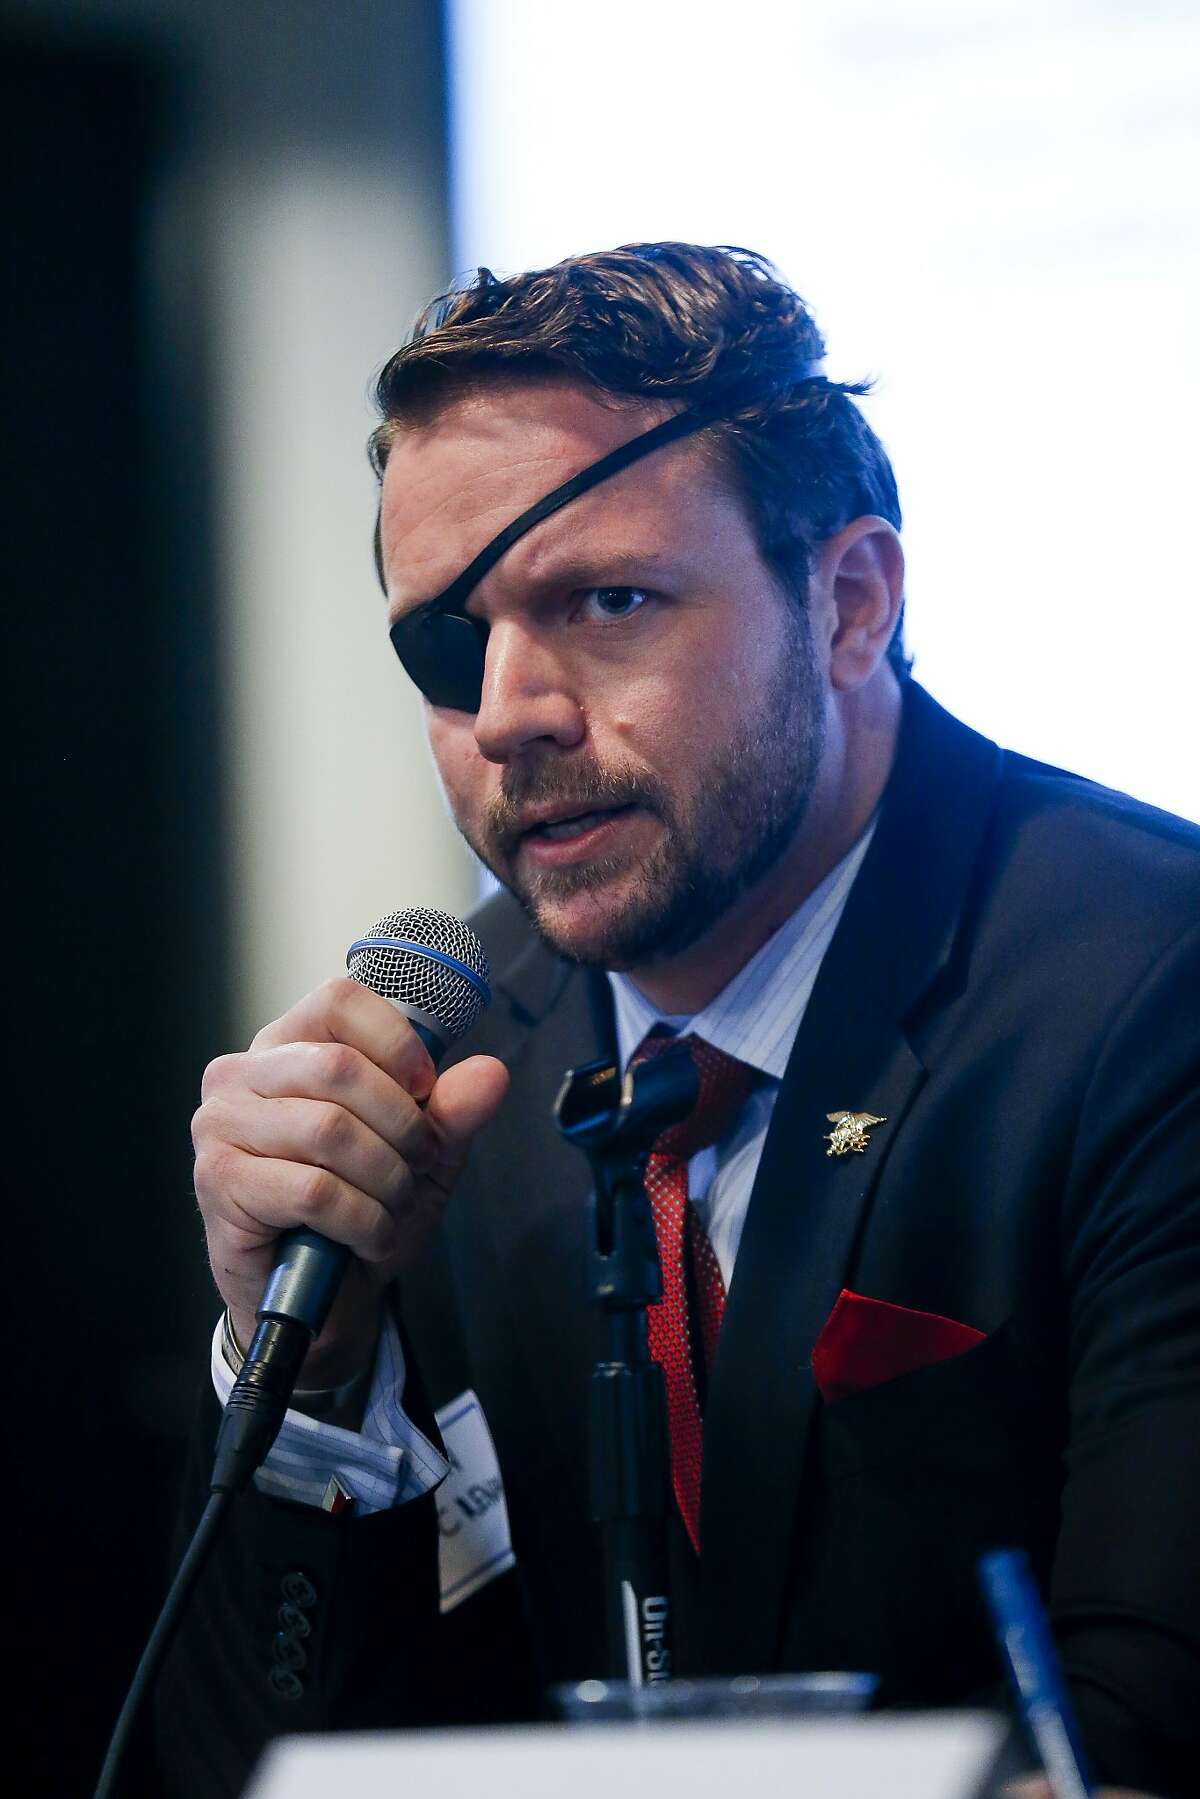 Dan Crenshaw joins a record number of Iraq and Afghanistan combat veterans elected to Congress.